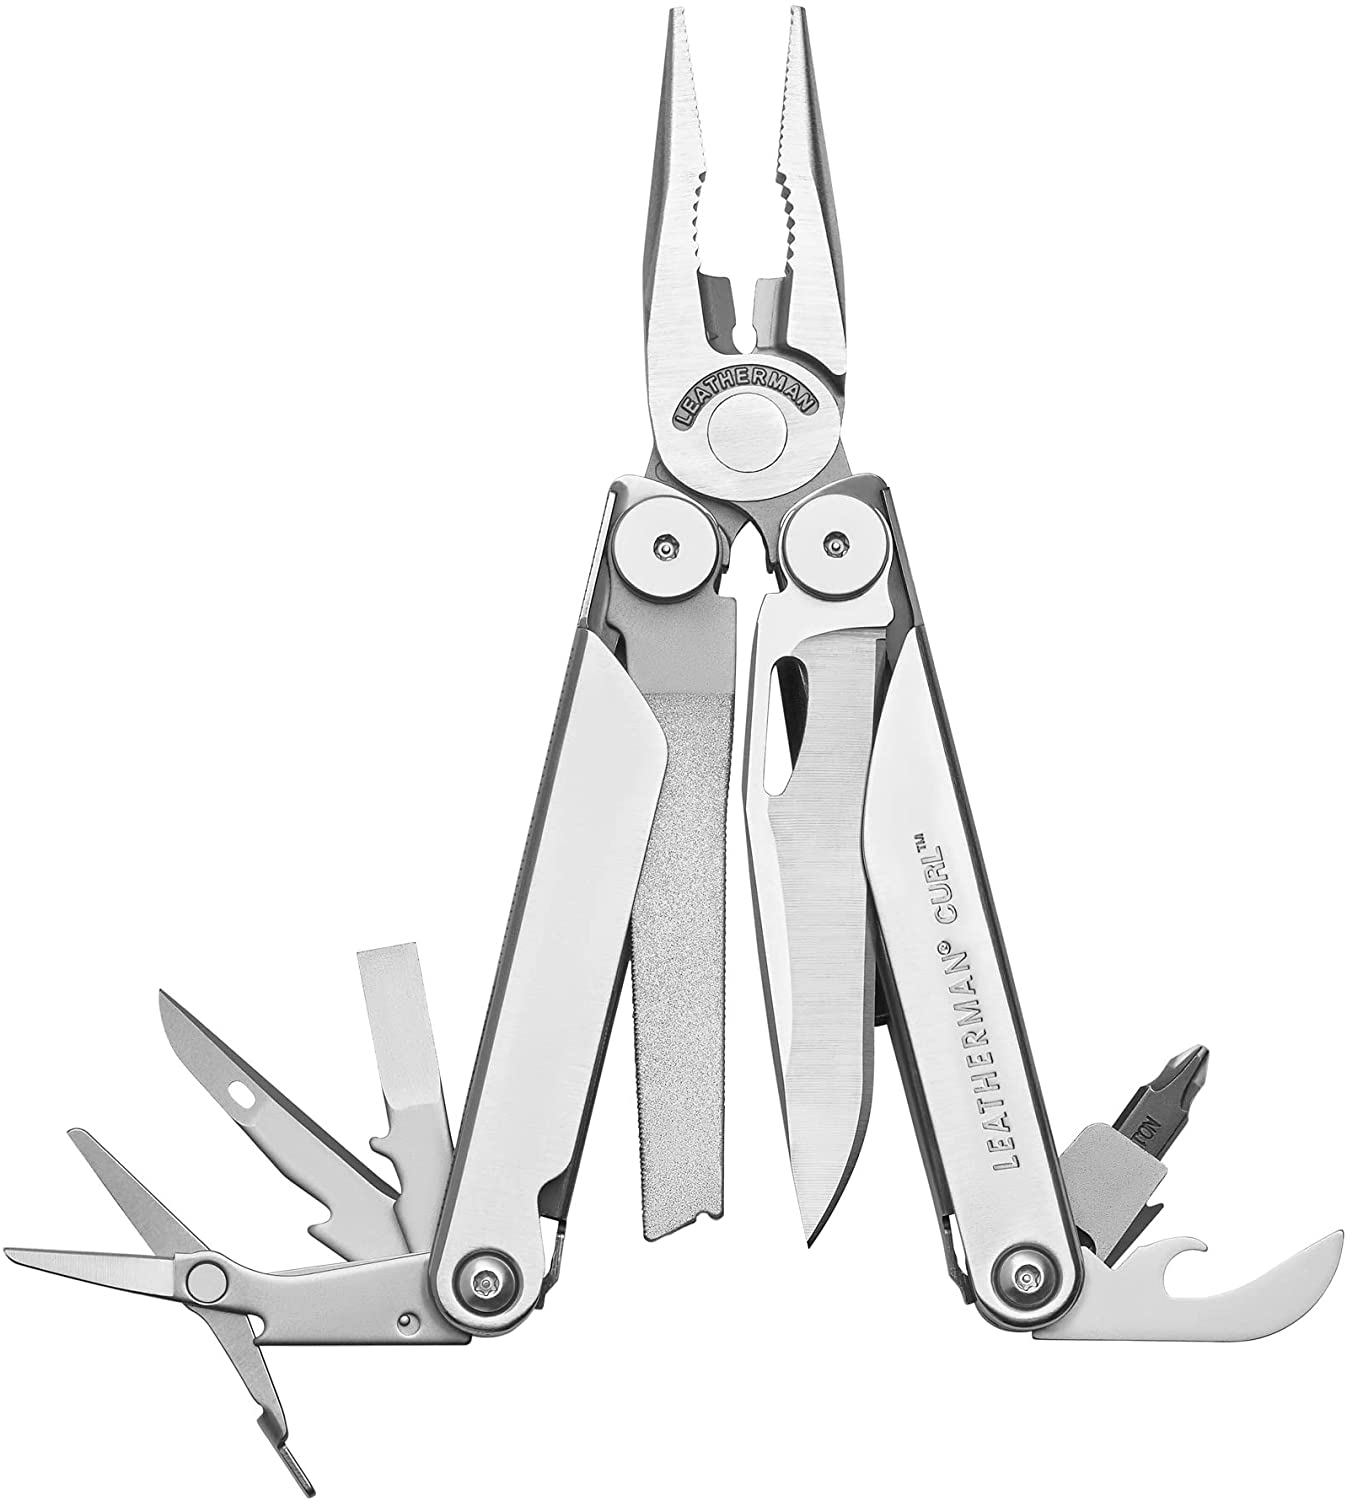 LEATHERMAN, Curl Multitool, Stainless Steel Everyday Tool with Nylon Sheath